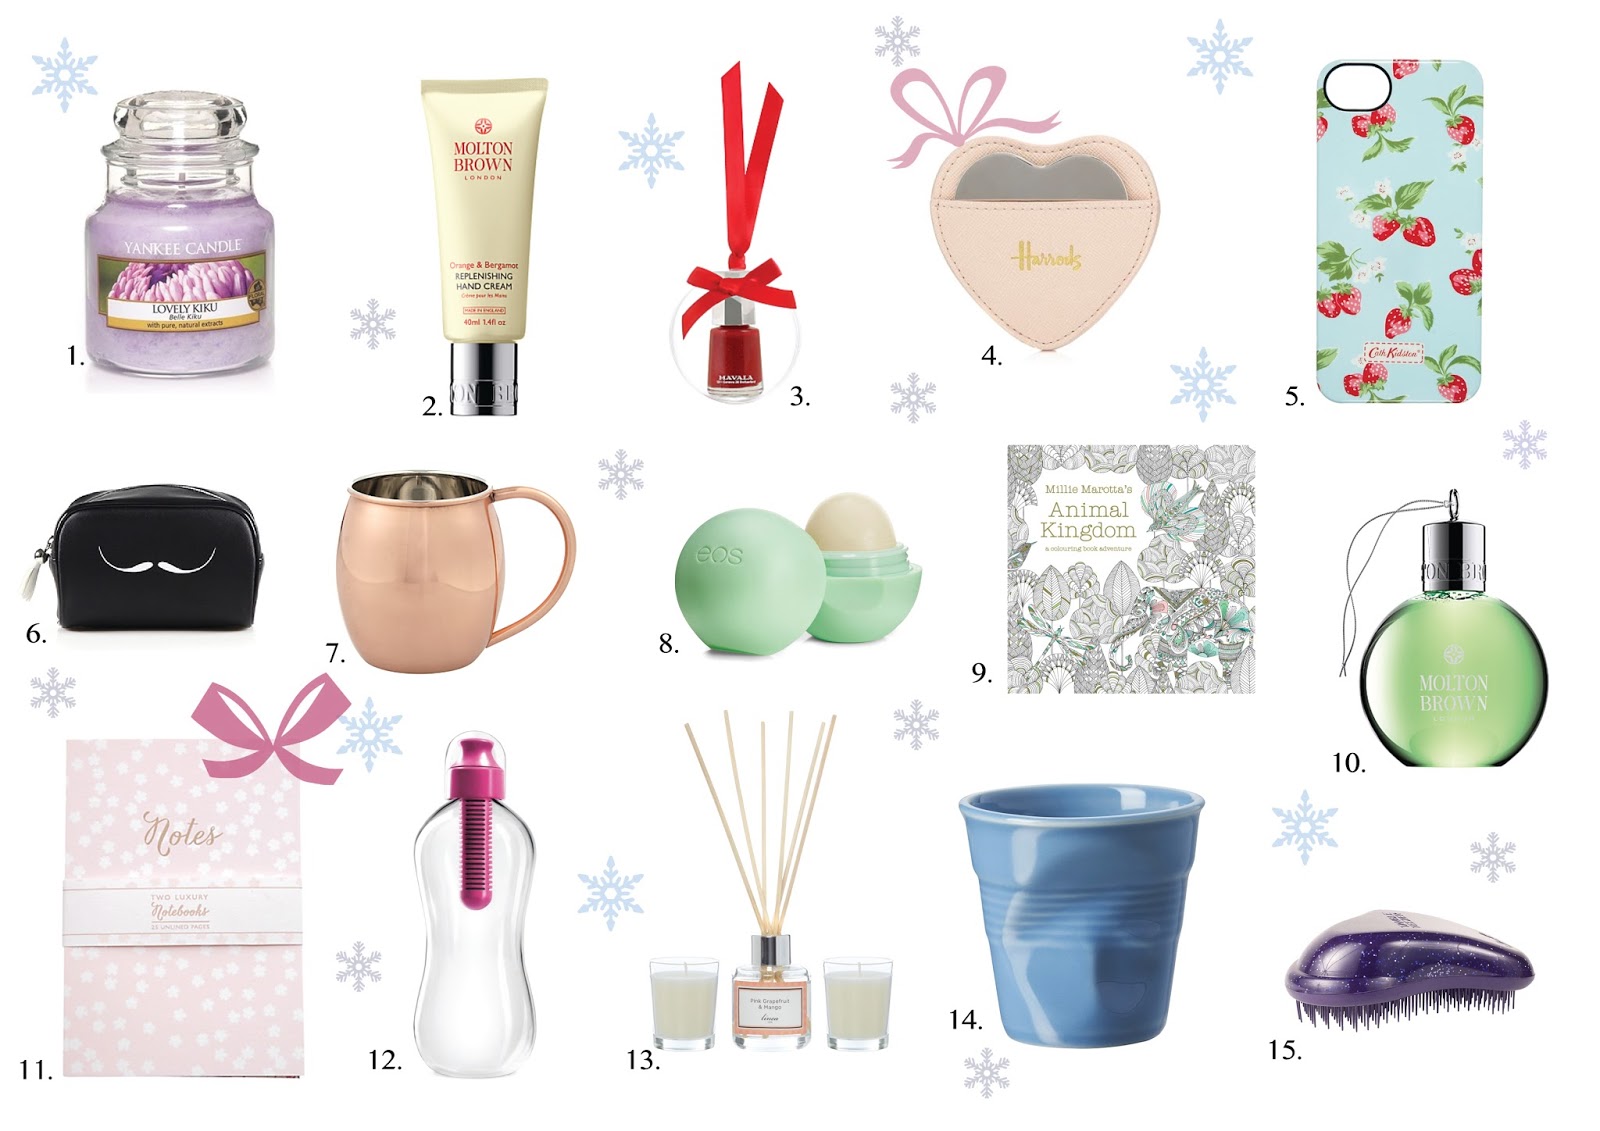 Gifts for less than €10